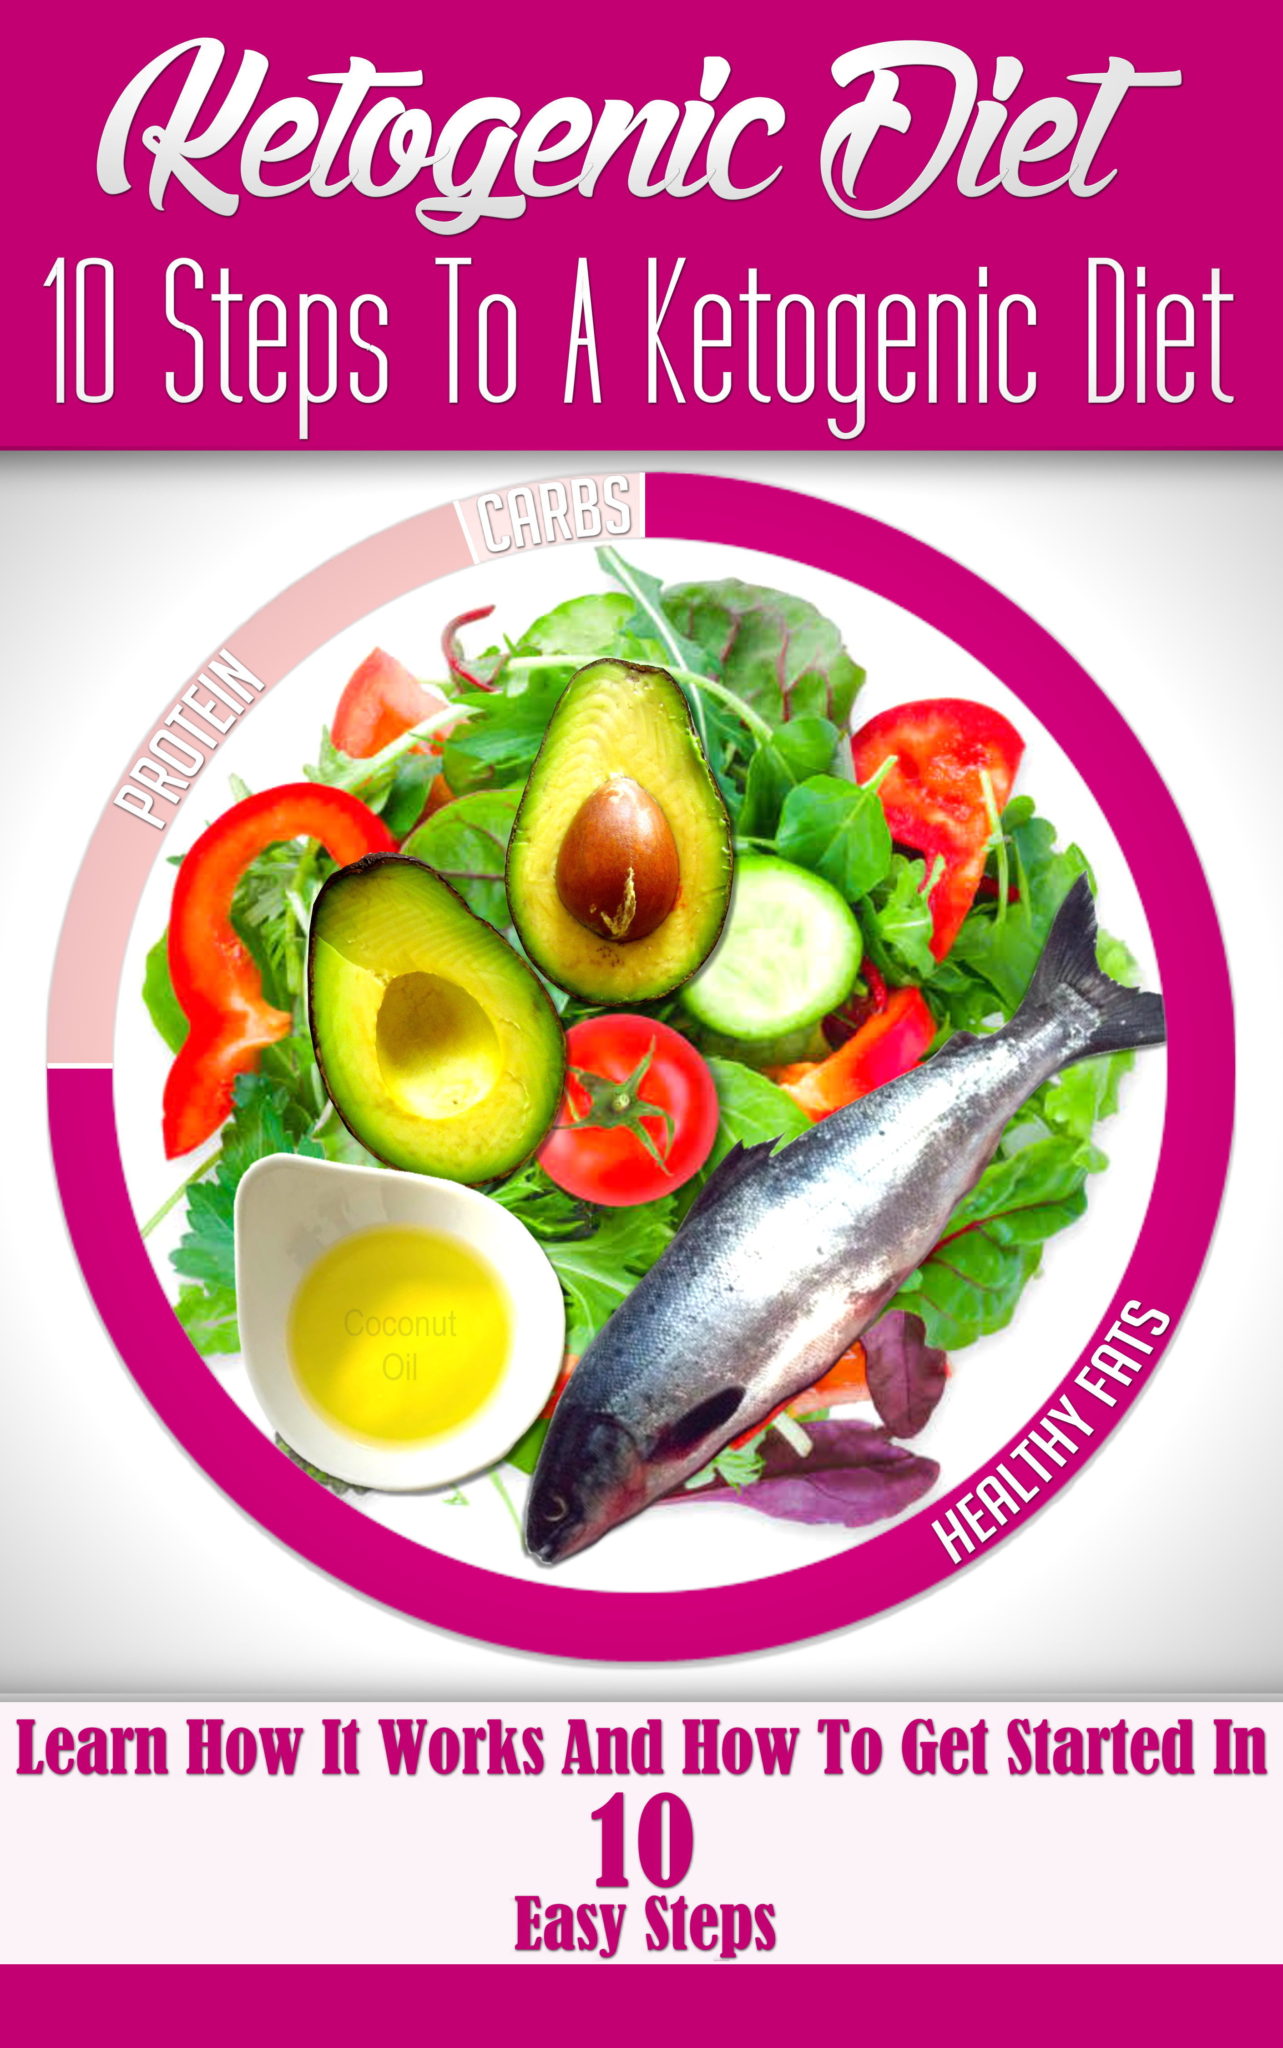 FREE: 10 Steps to a Ketogenic Diet: Learn How It Works & How To Get Started In 10 Easy Steps by Michael Volpi